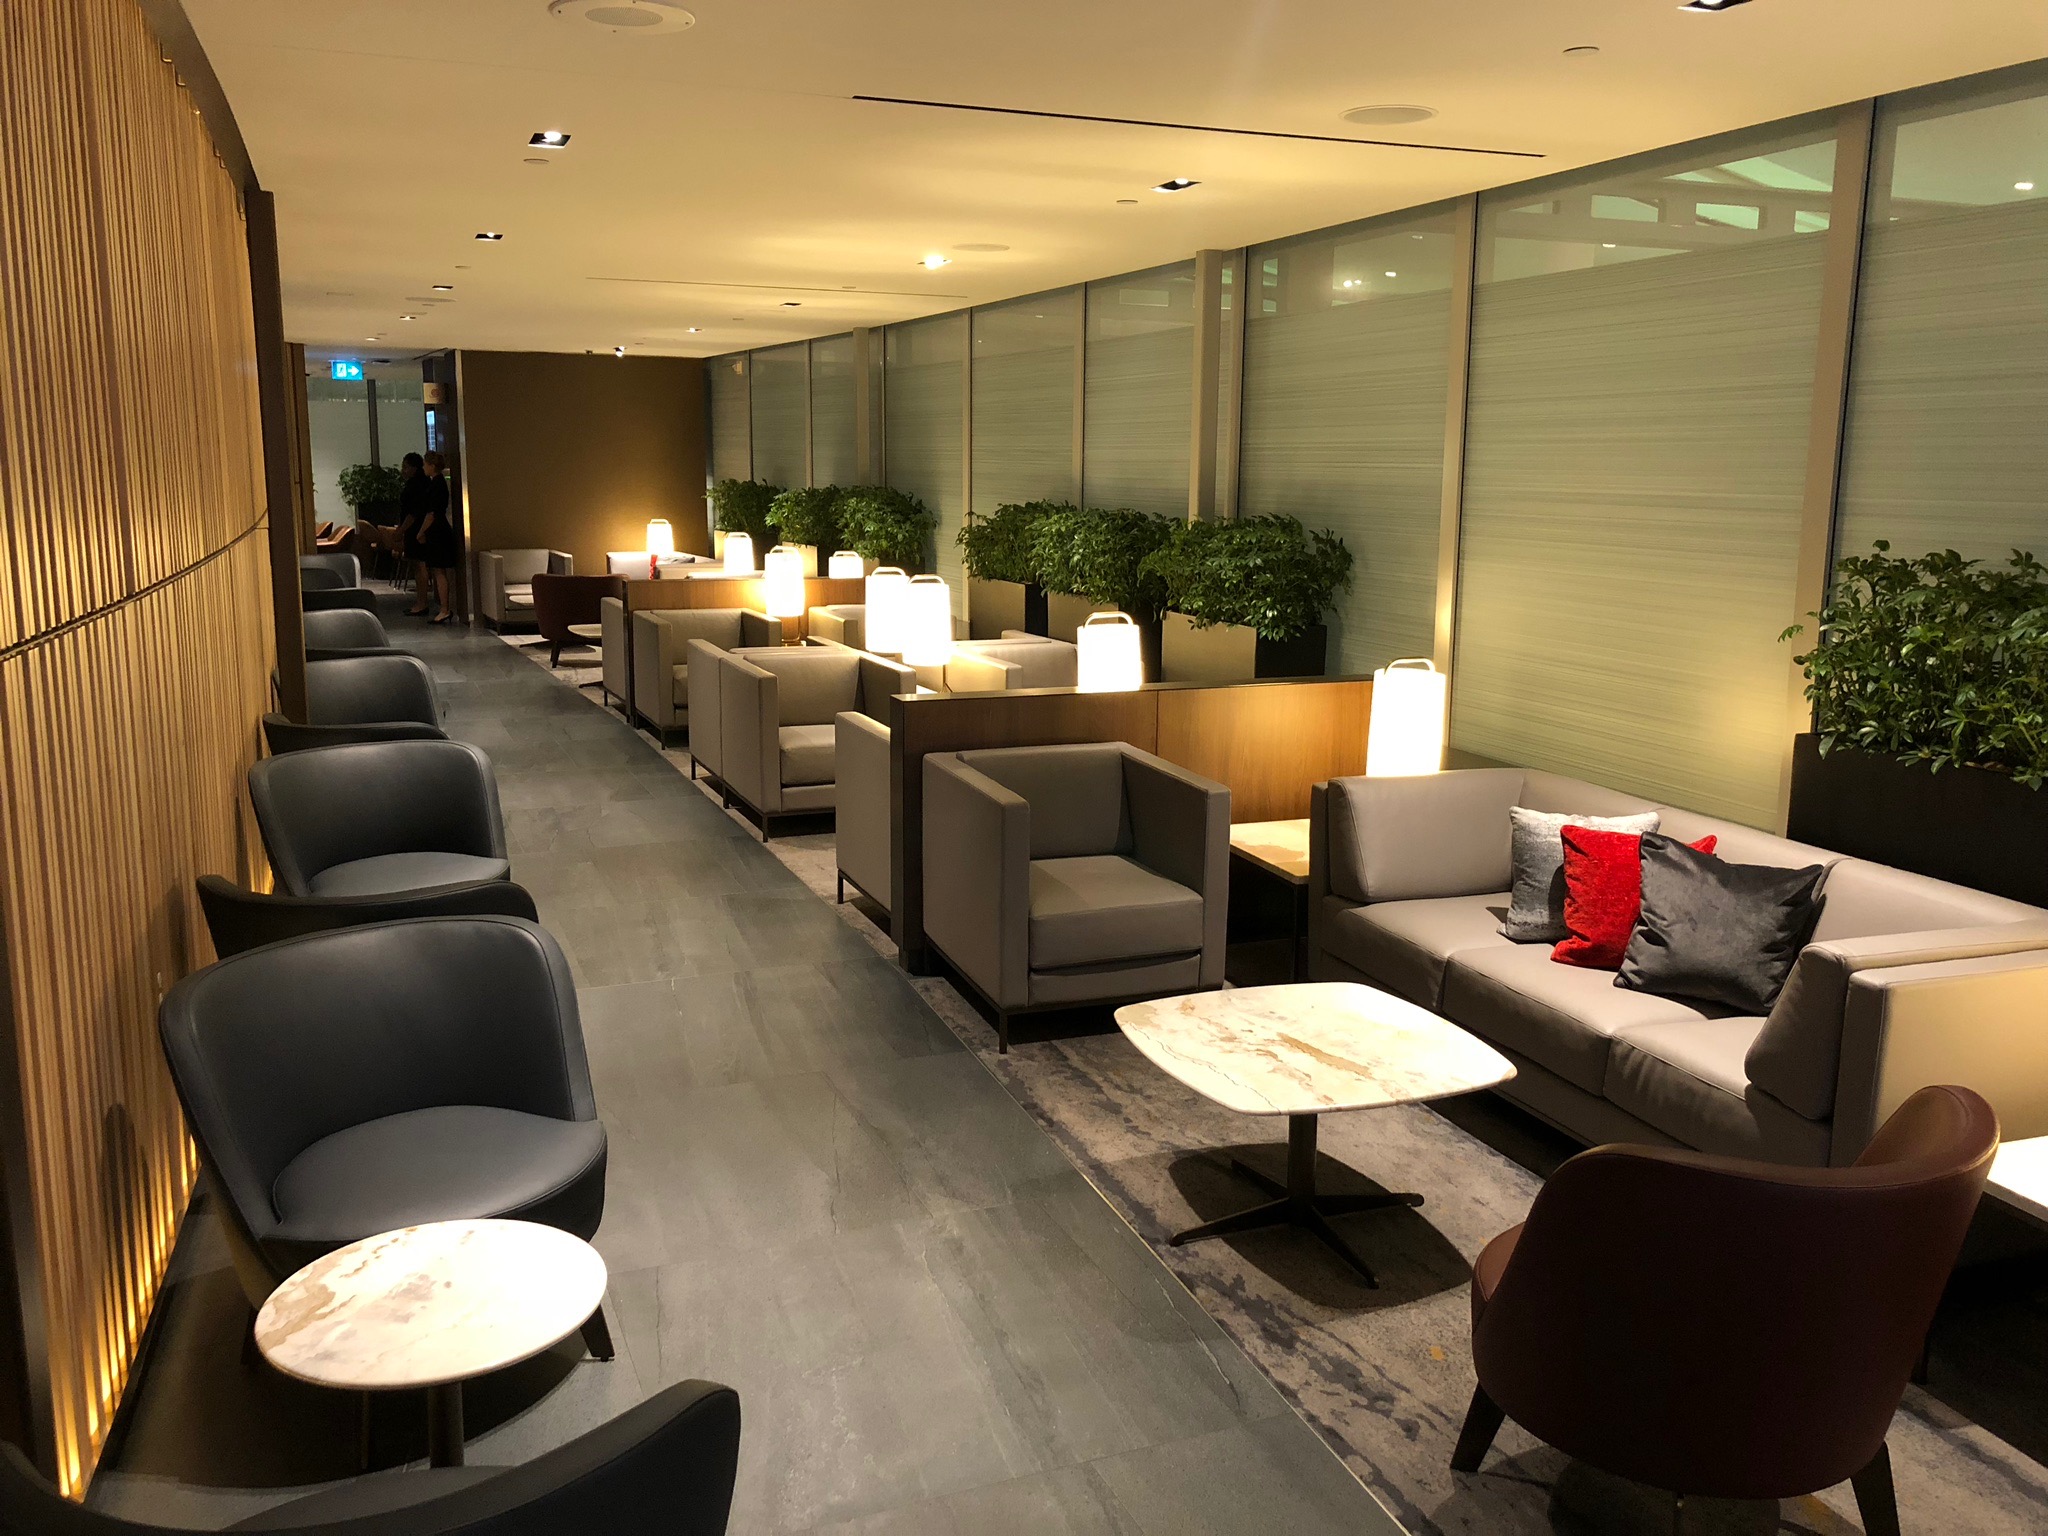 Air Canada Opened A Stunning New Bell Centre Lounge But It's Not